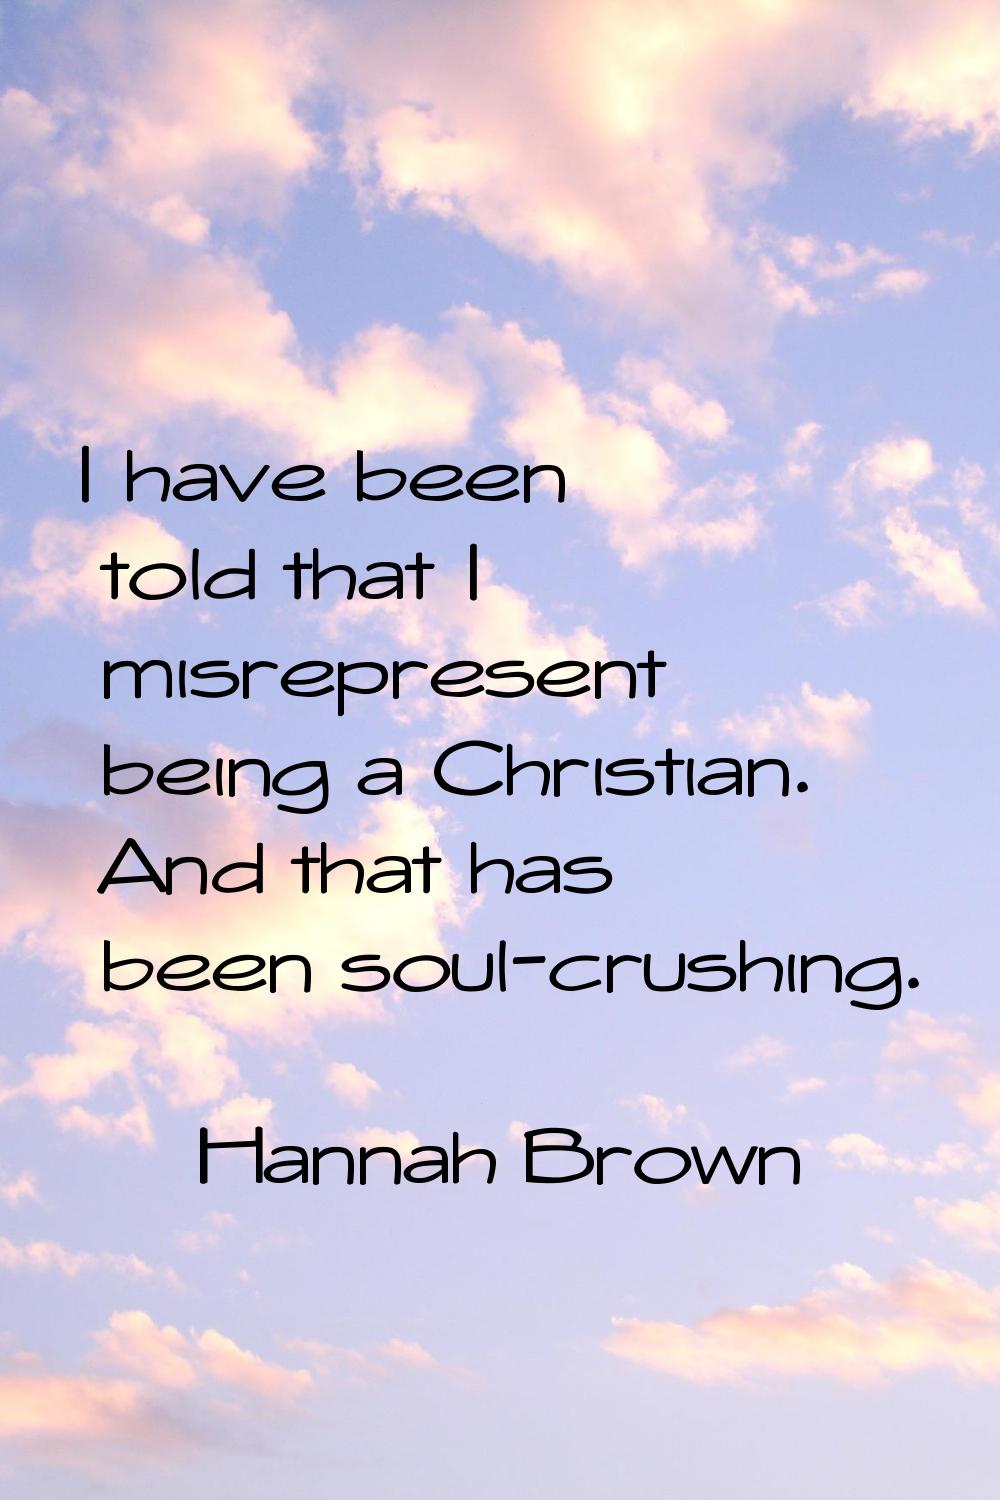 I have been told that I misrepresent being a Christian. And that has been soul-crushing.